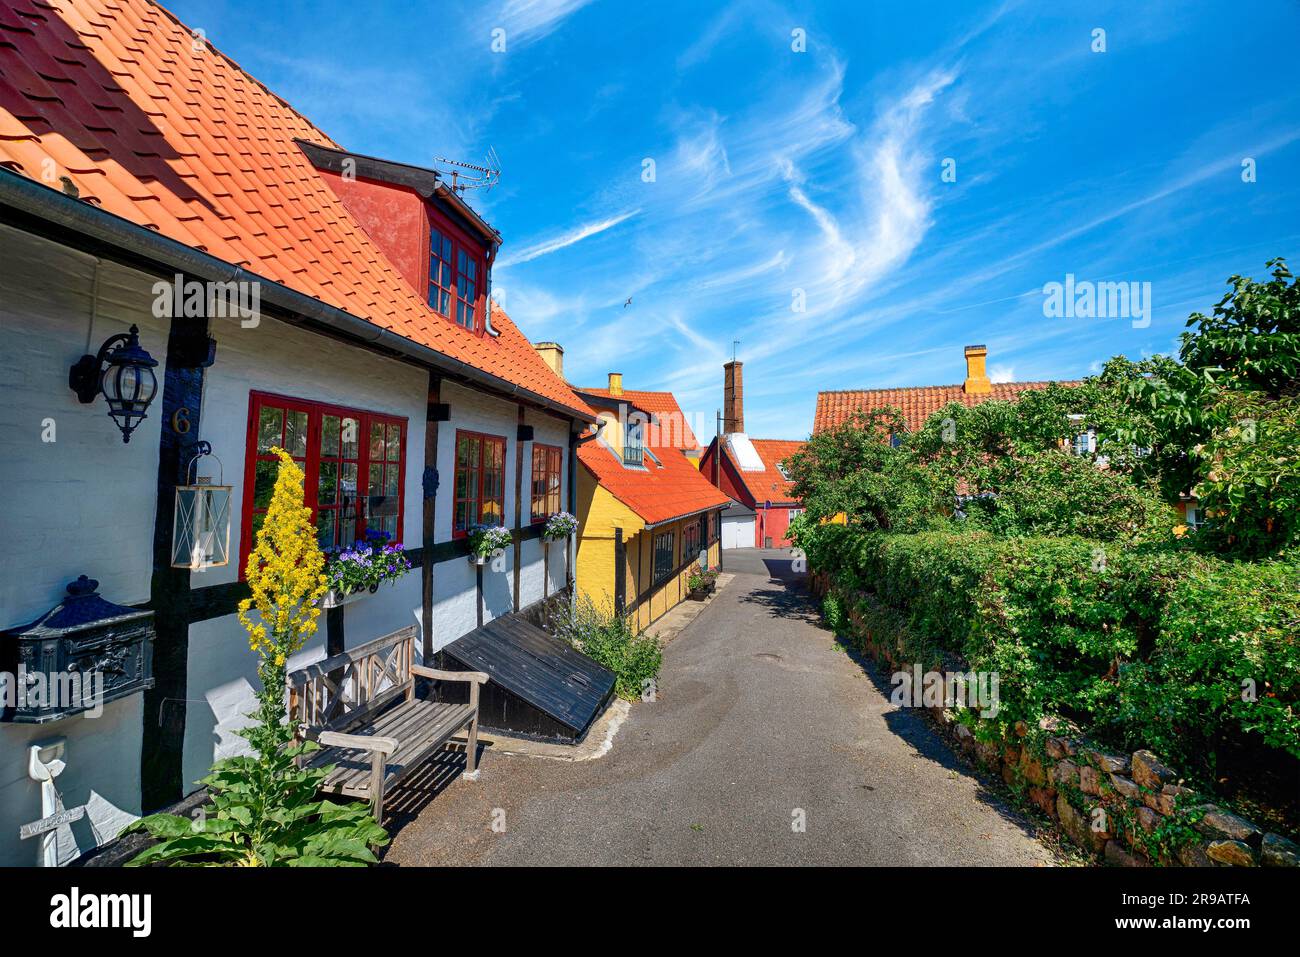 Scandinavian street in a small village in the summer with colorful buildings under a blue sky Stock Photo